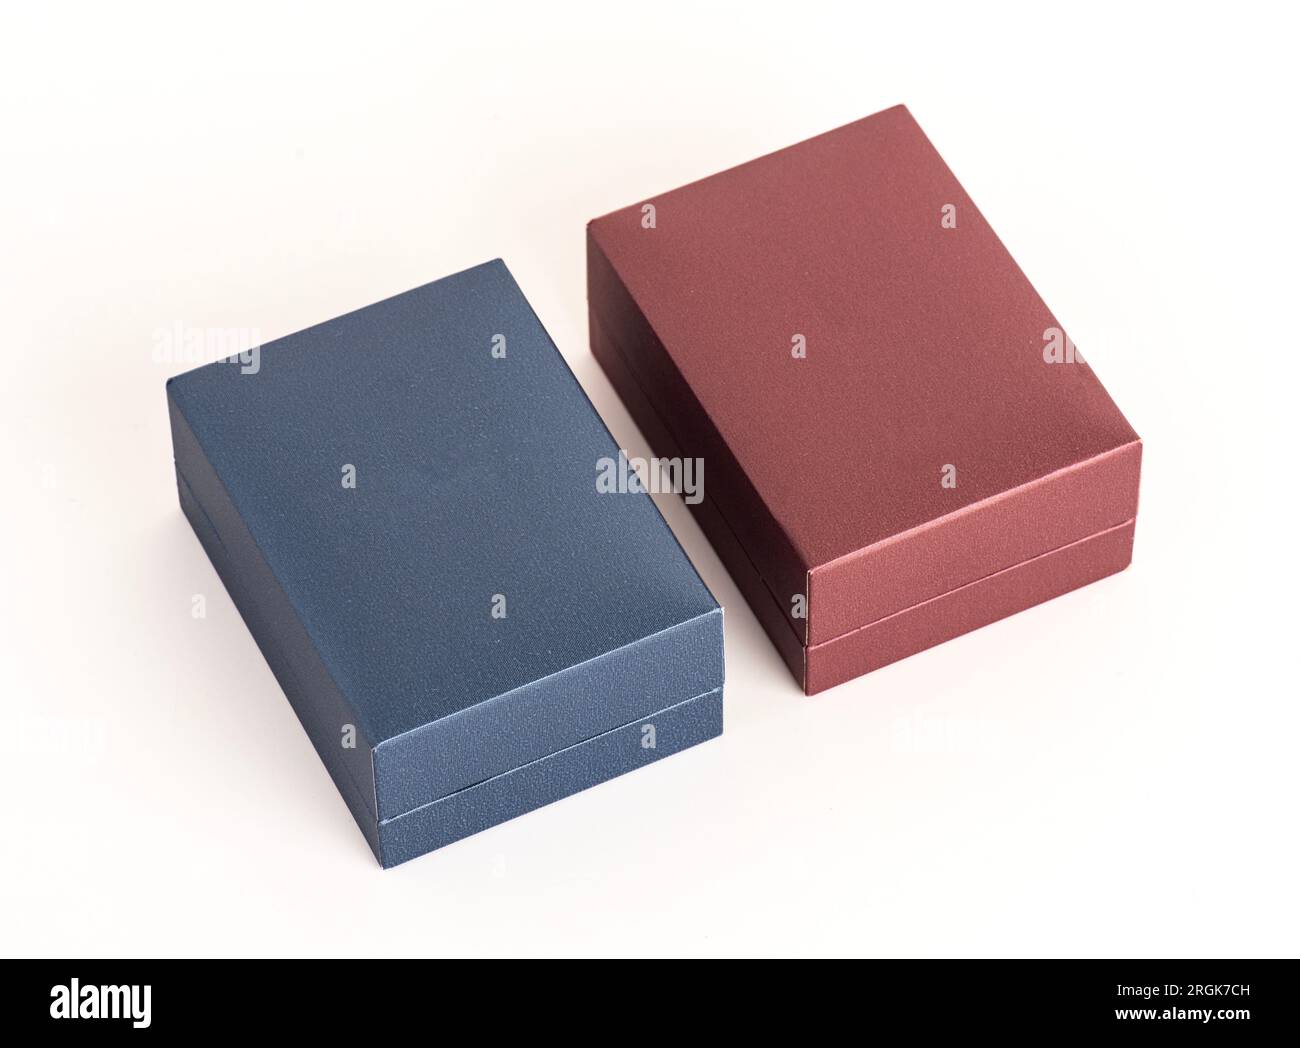 Jewelry Box on white background. Colorful jewelry boxes closed. Mockup. Stock Photo